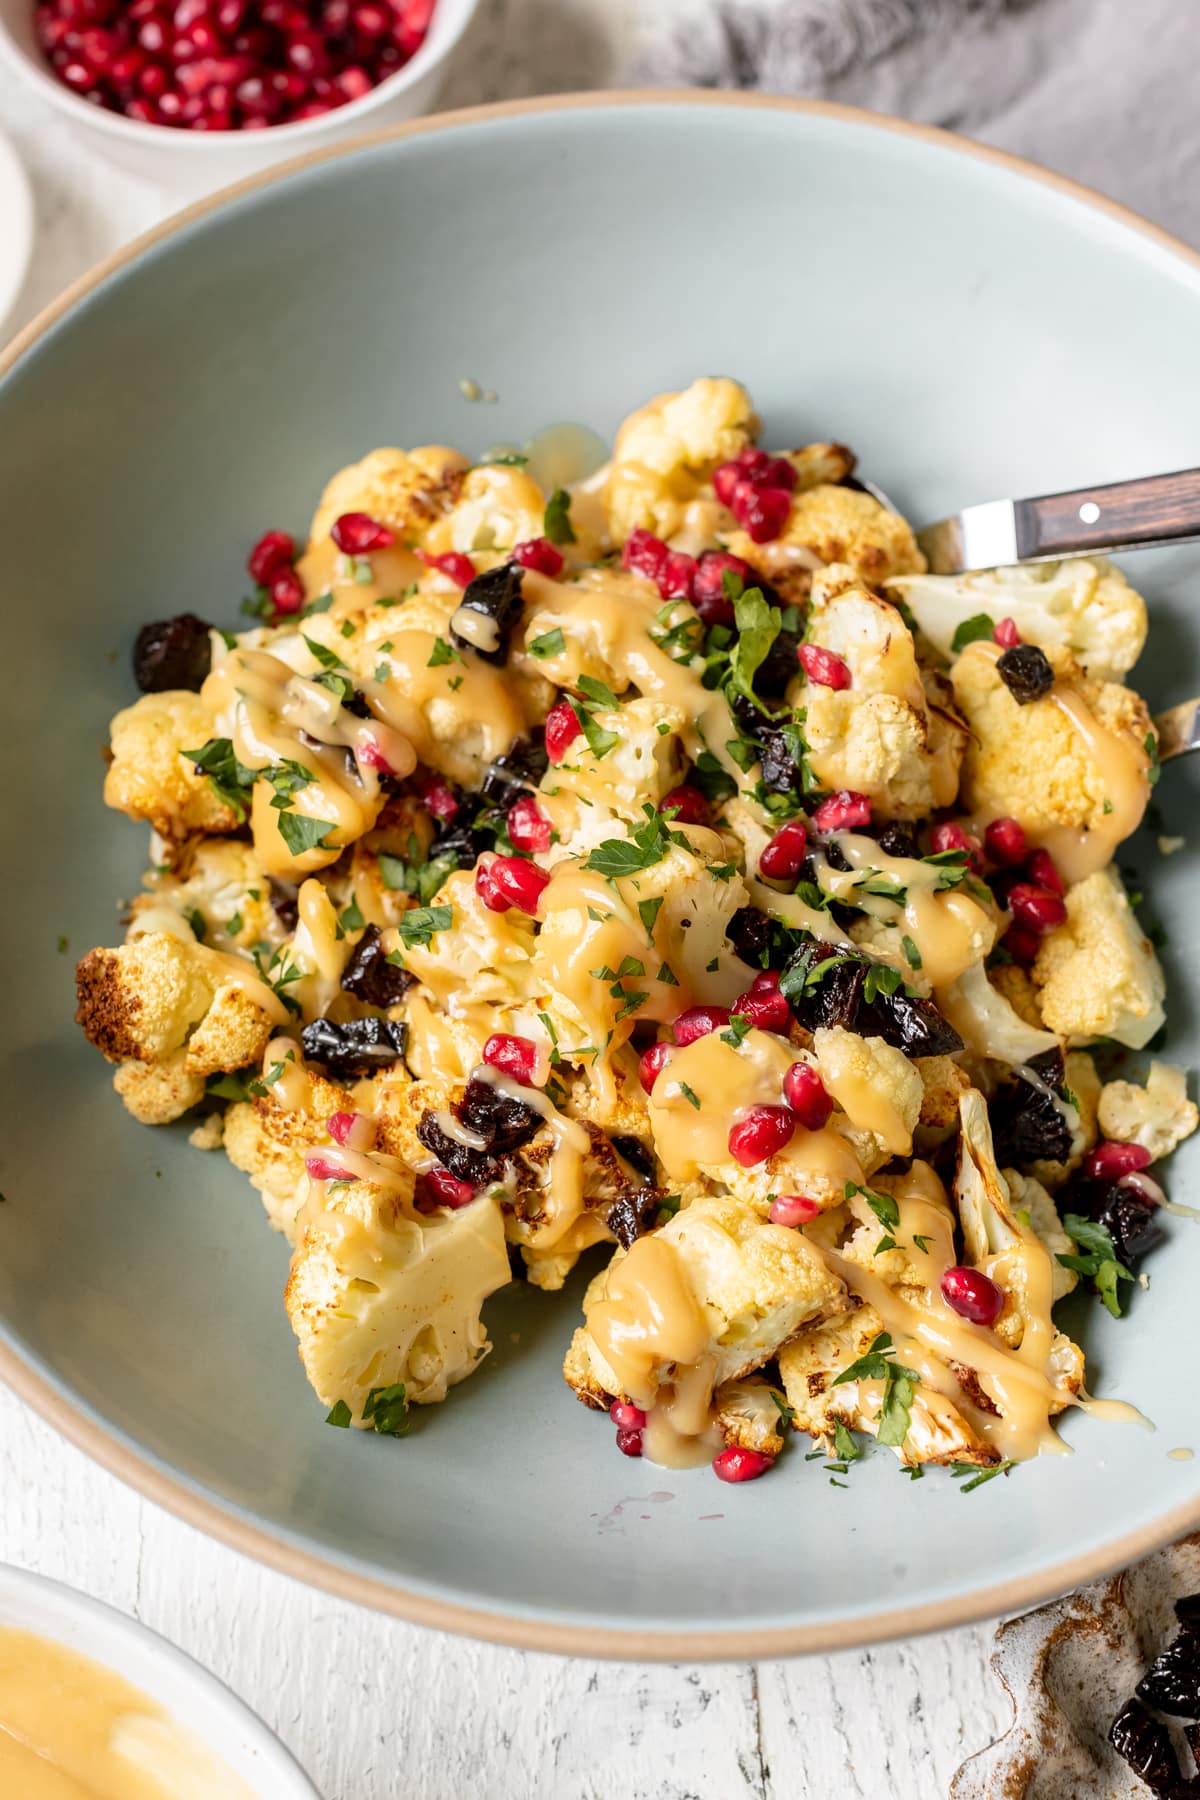 cauliflower drizzled in a mustard sauce with pomegranate perils & green spices